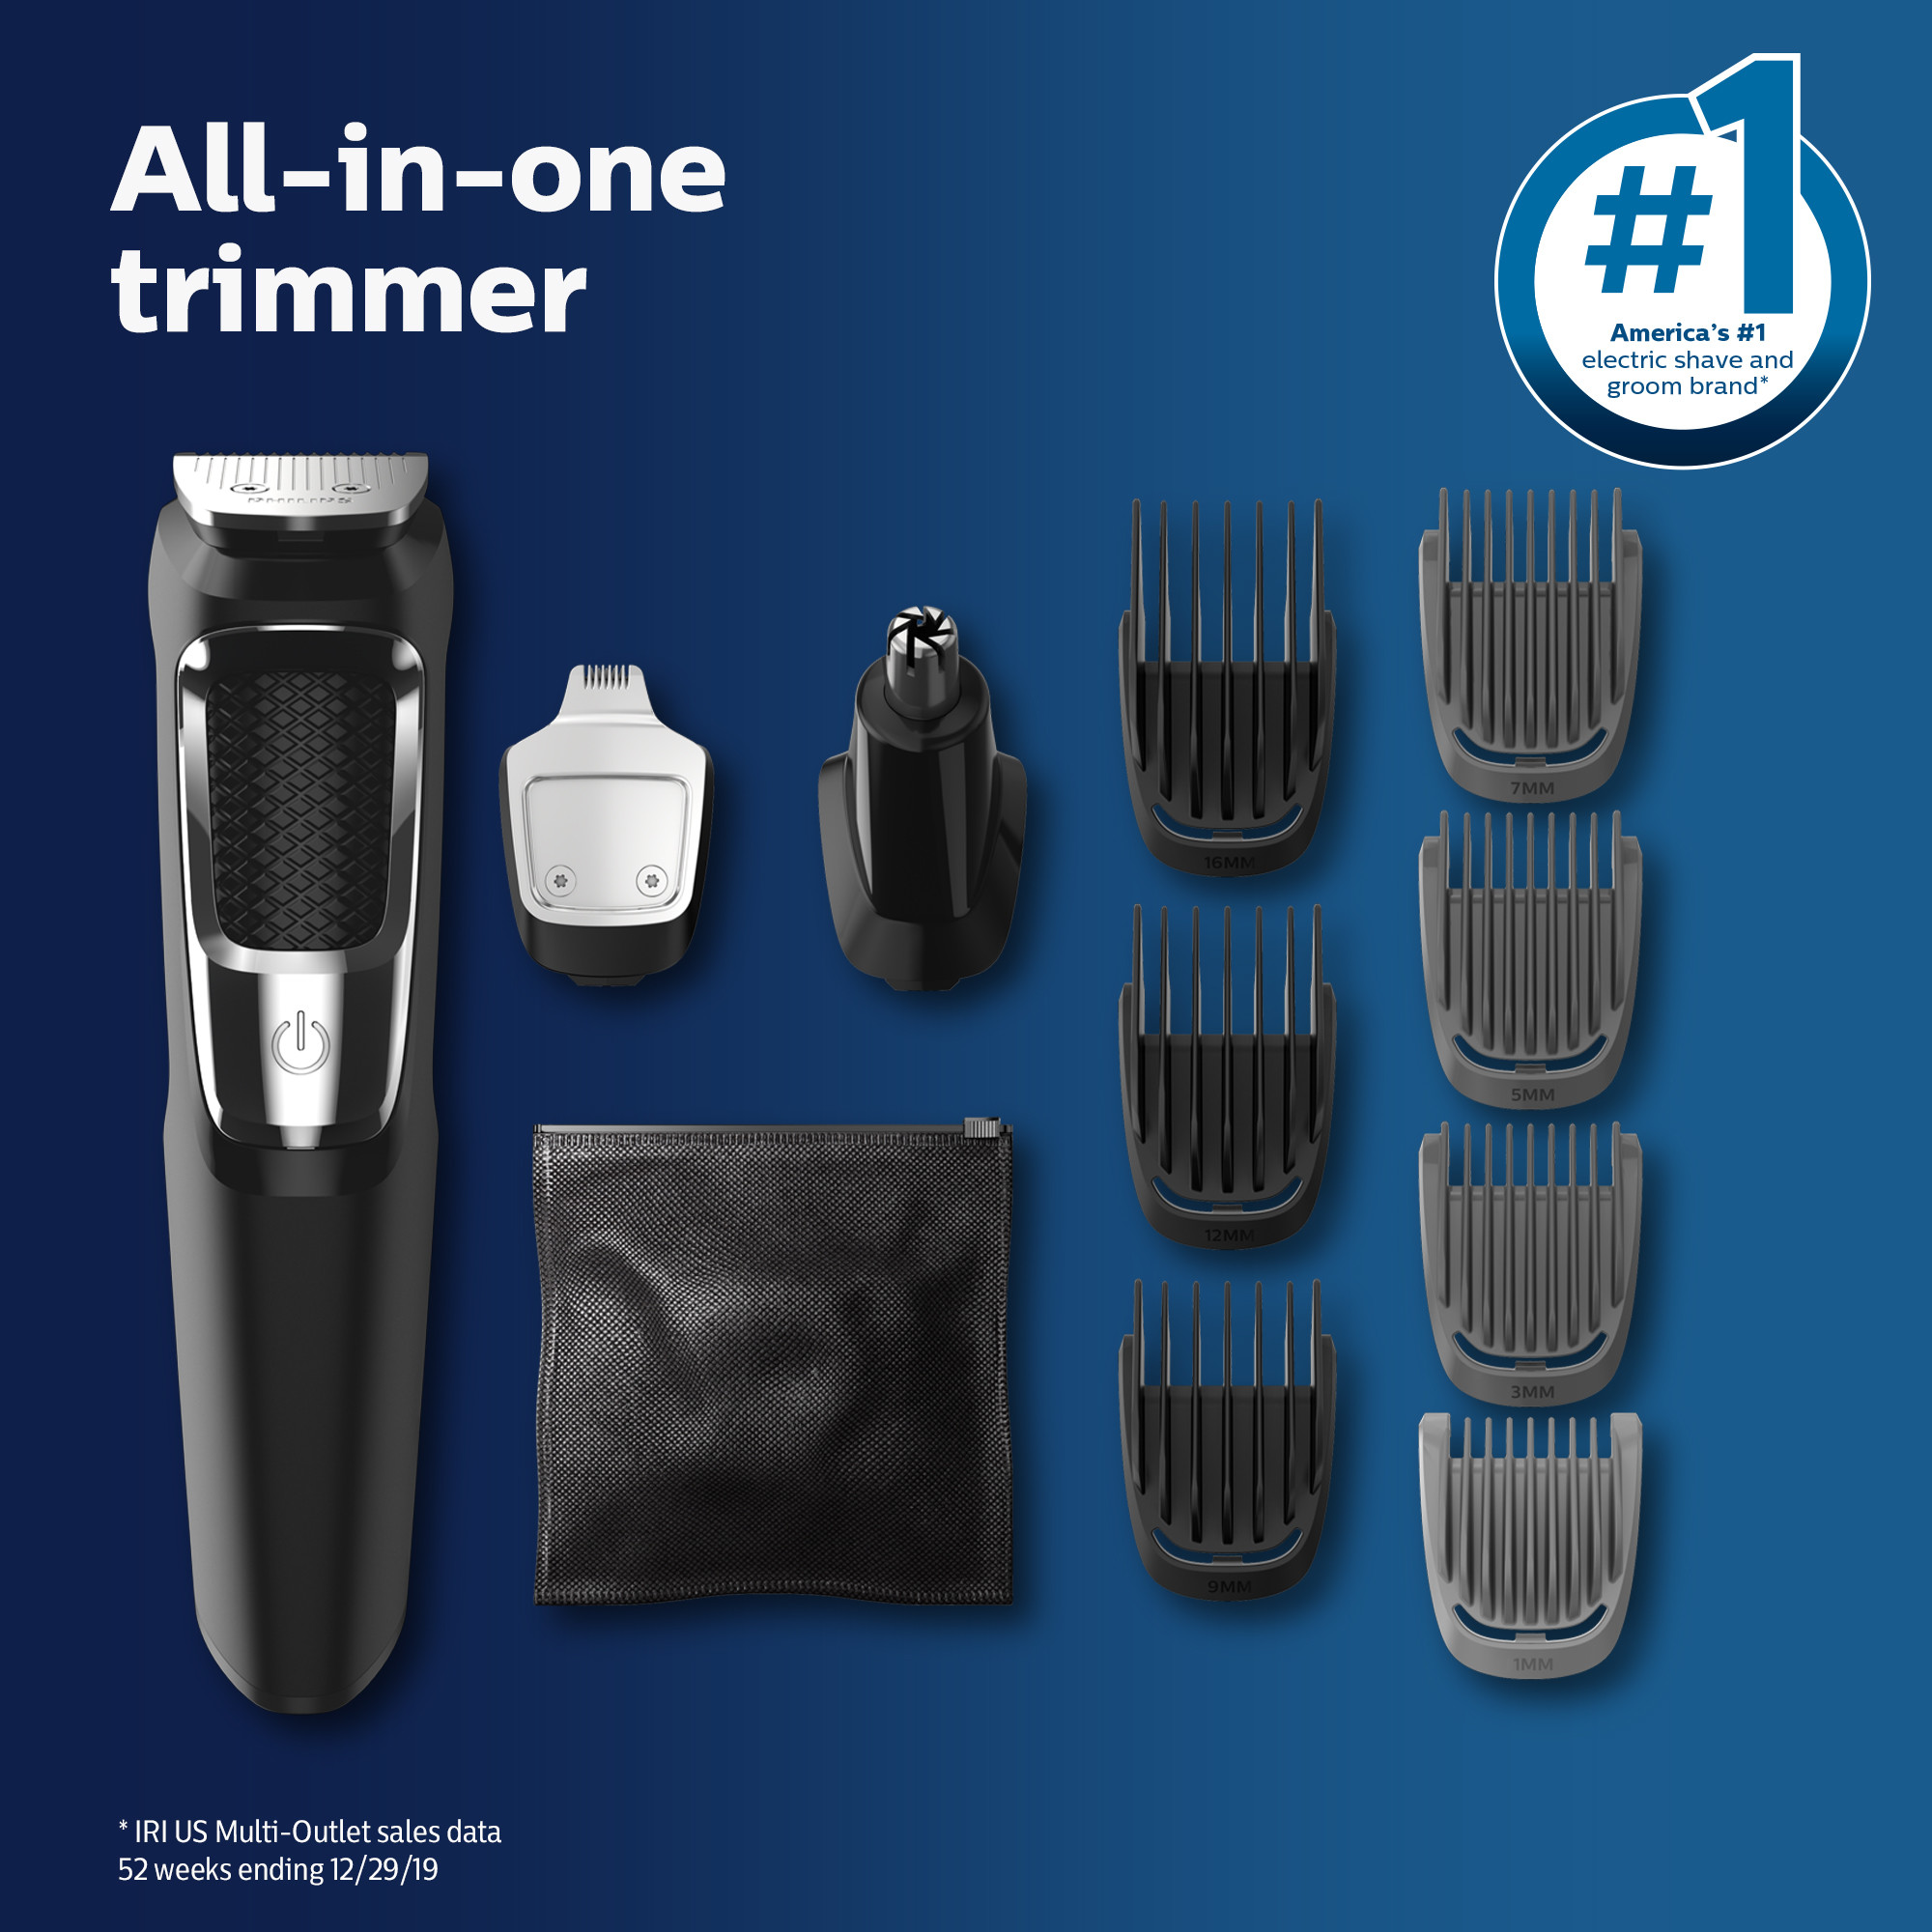 Philips Norelco Multi Groomer - 13 Piece Mens Grooming Kit For Beard, Face, Nose, and Ear Hair Trimmer and Hair Clipper - No Blade Oil Needed, MG3750/60 - image 4 of 34